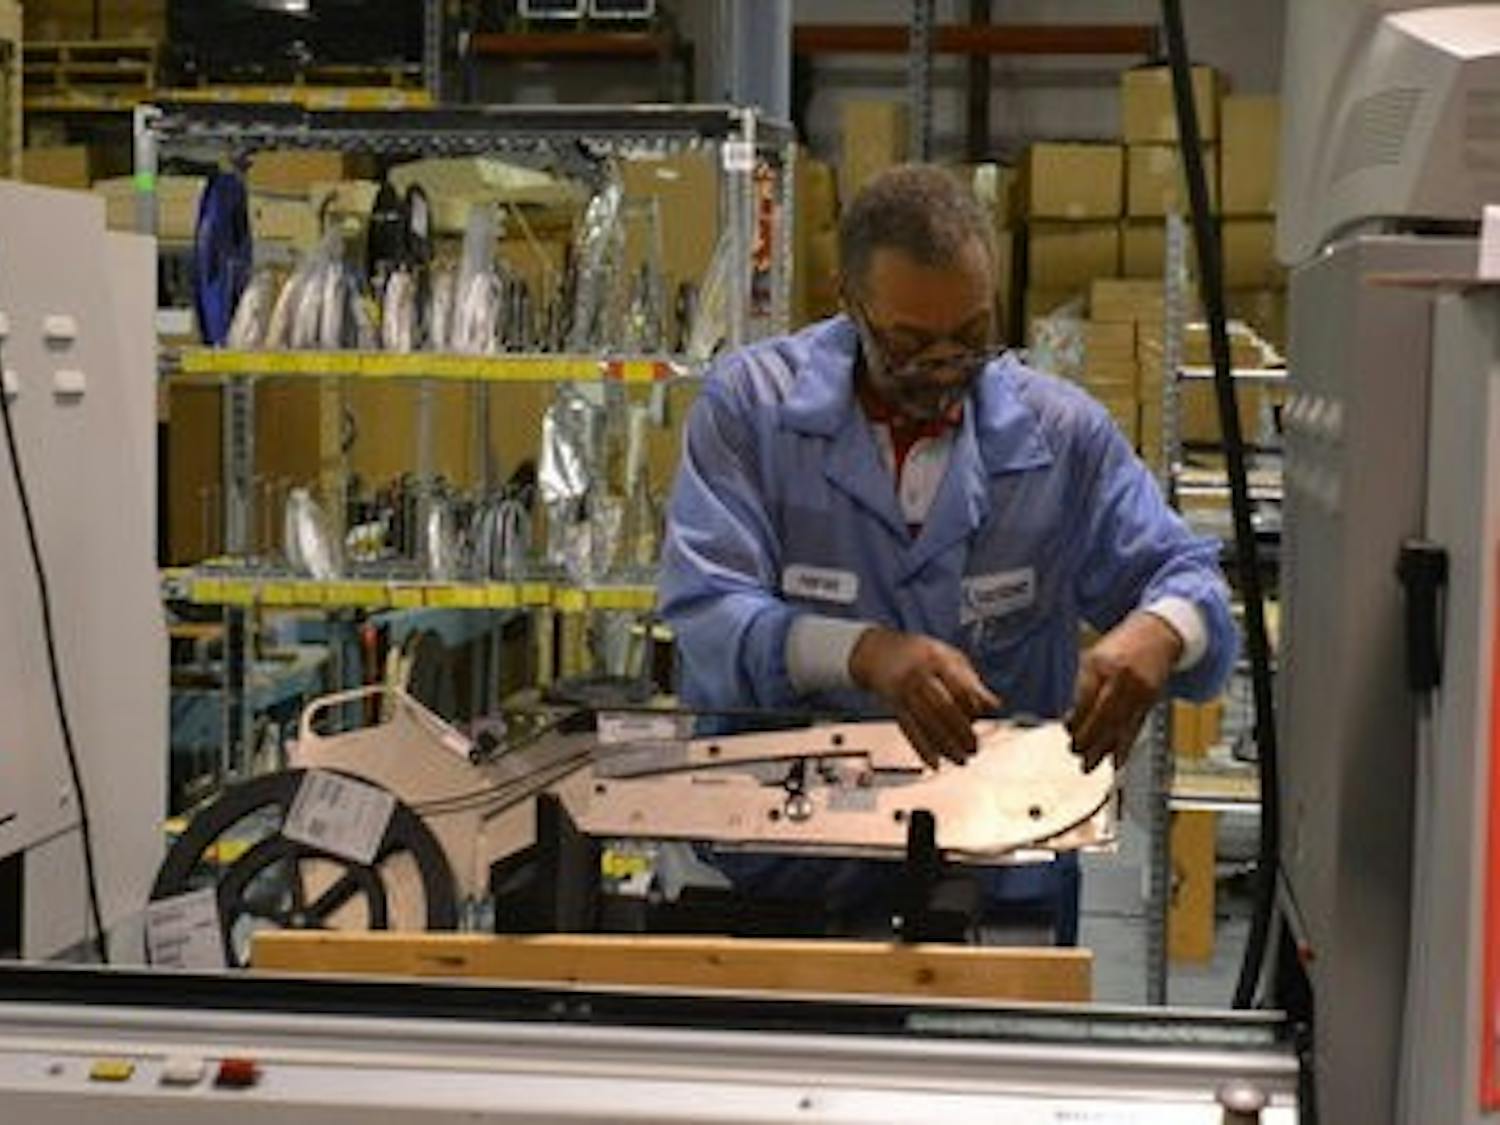 Harold Marshall, surface-mount technology operator, continues his work on manufacturing circuit boards for CoachComm. (Danielle Lowe / PHOTO EDITOR)